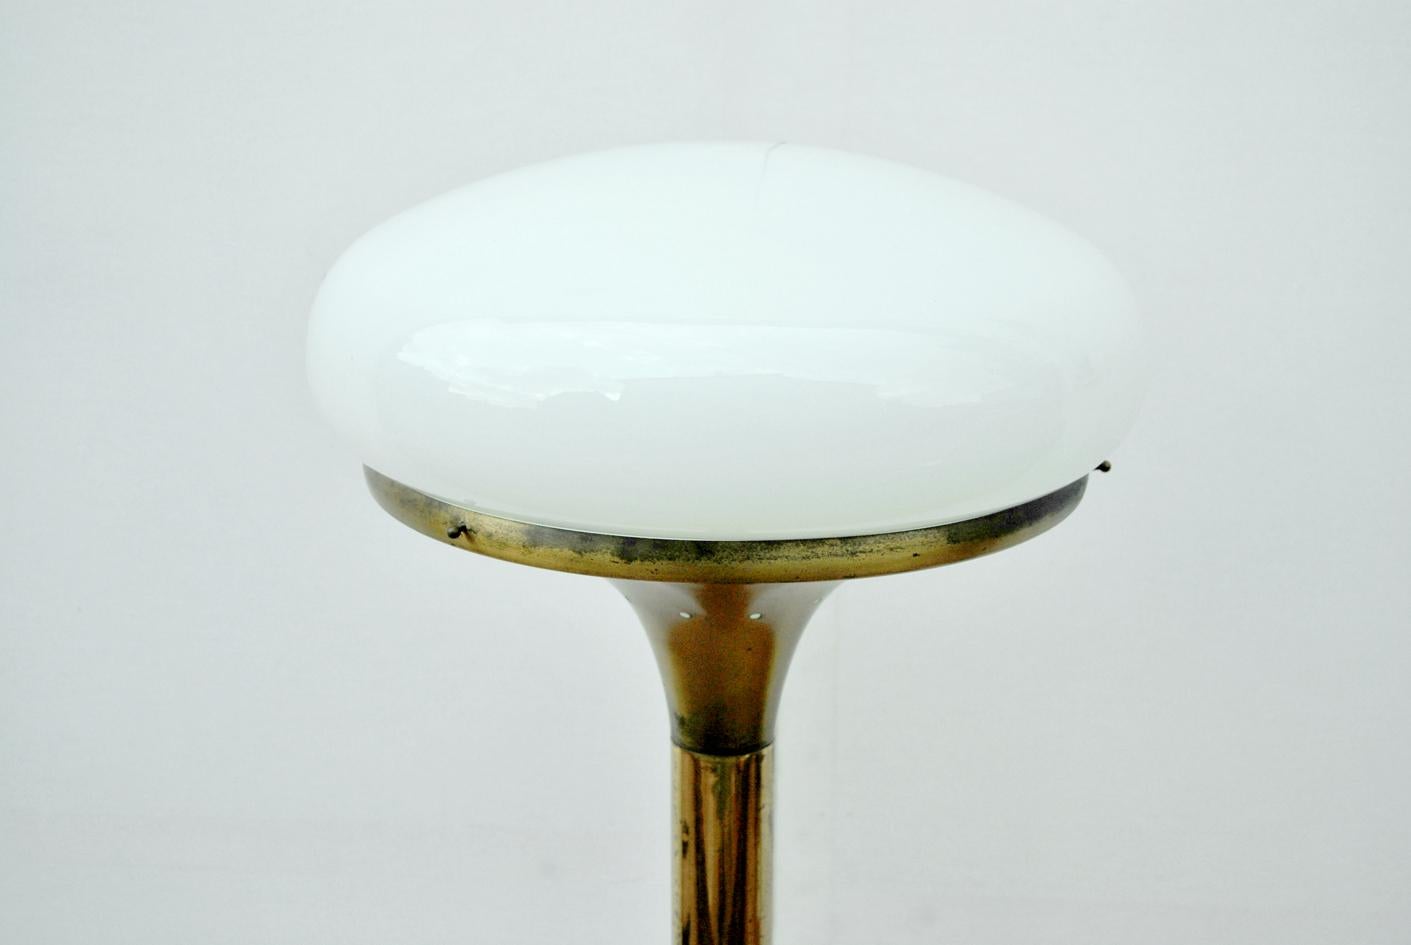 Vintage floor lamp floor lamp by Gaetano Sciolari
Made in Italy in the 1970s, this beautiful and rare floor lamp was constructed of brass, with an opaline Murano glass shade. Designed by Gaetano Sciolari, it stands out for its simple and elegant